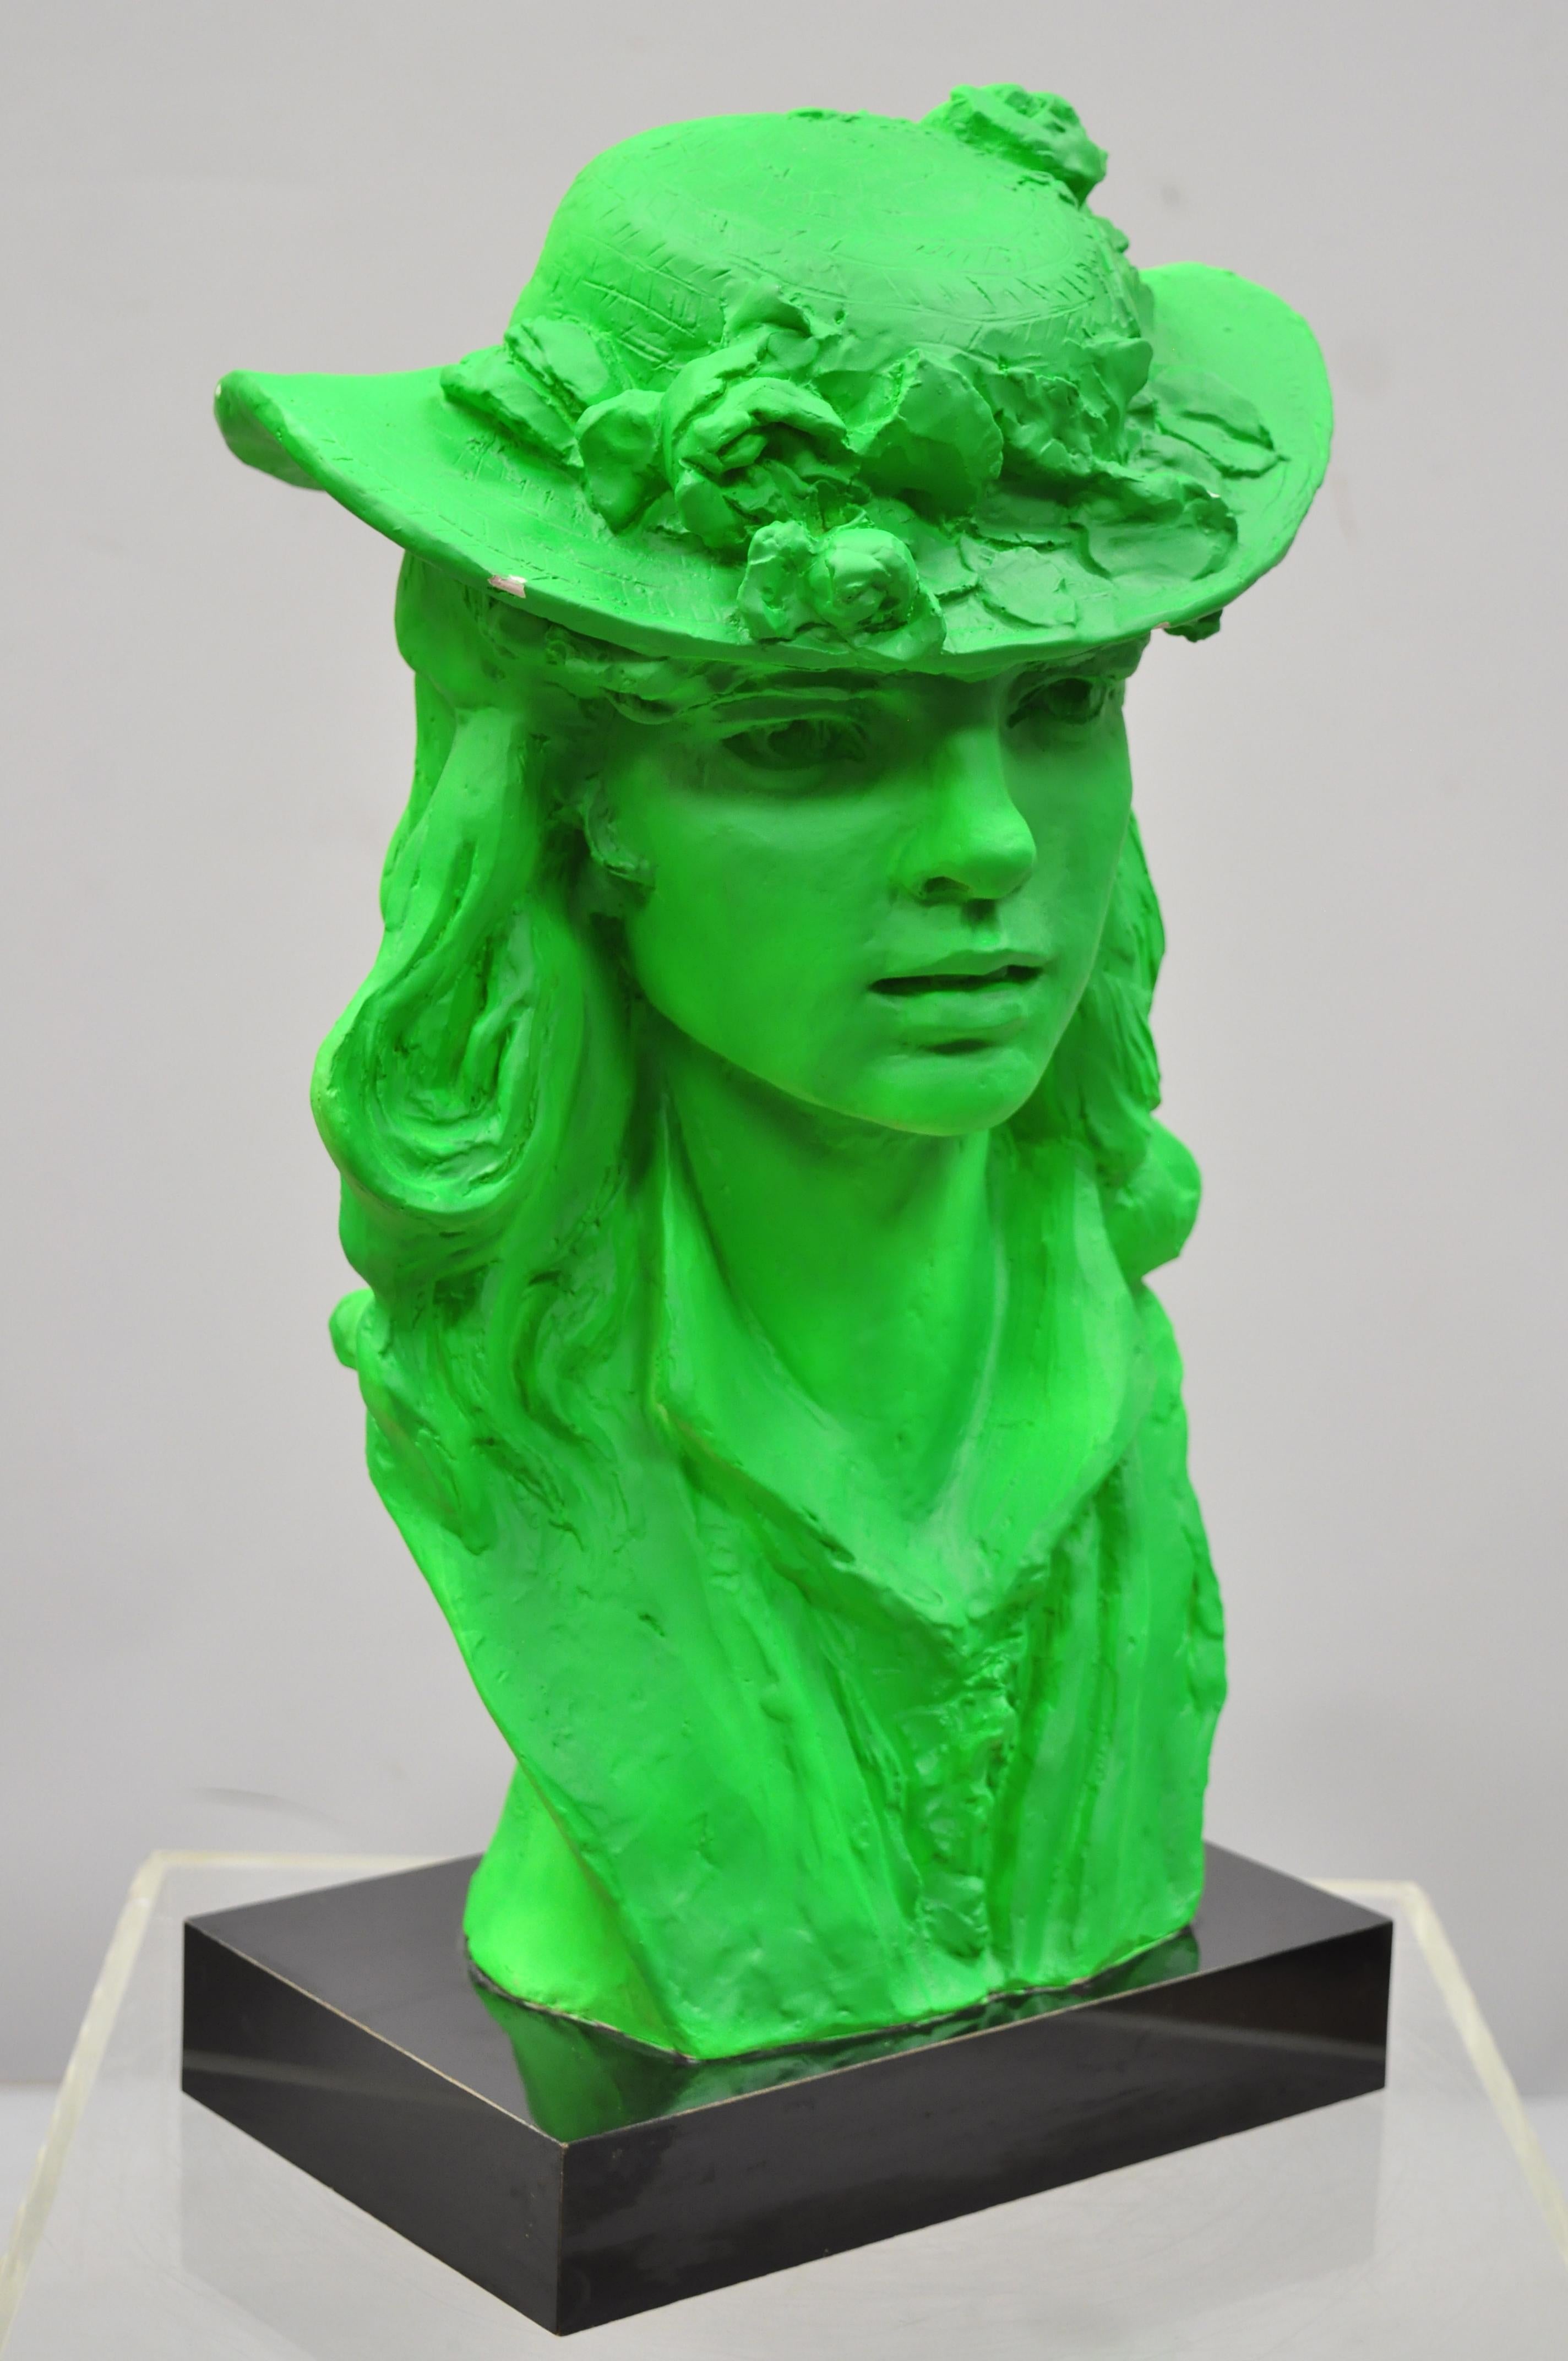 1979 Green Victorian style plaster sculpture woman bust in hat by Austin Productions Inc. Item includes a cast plaster form, green finish, beautiful woman with long hair and hat, very unique vintage item, circa 1979. Measurements: 21